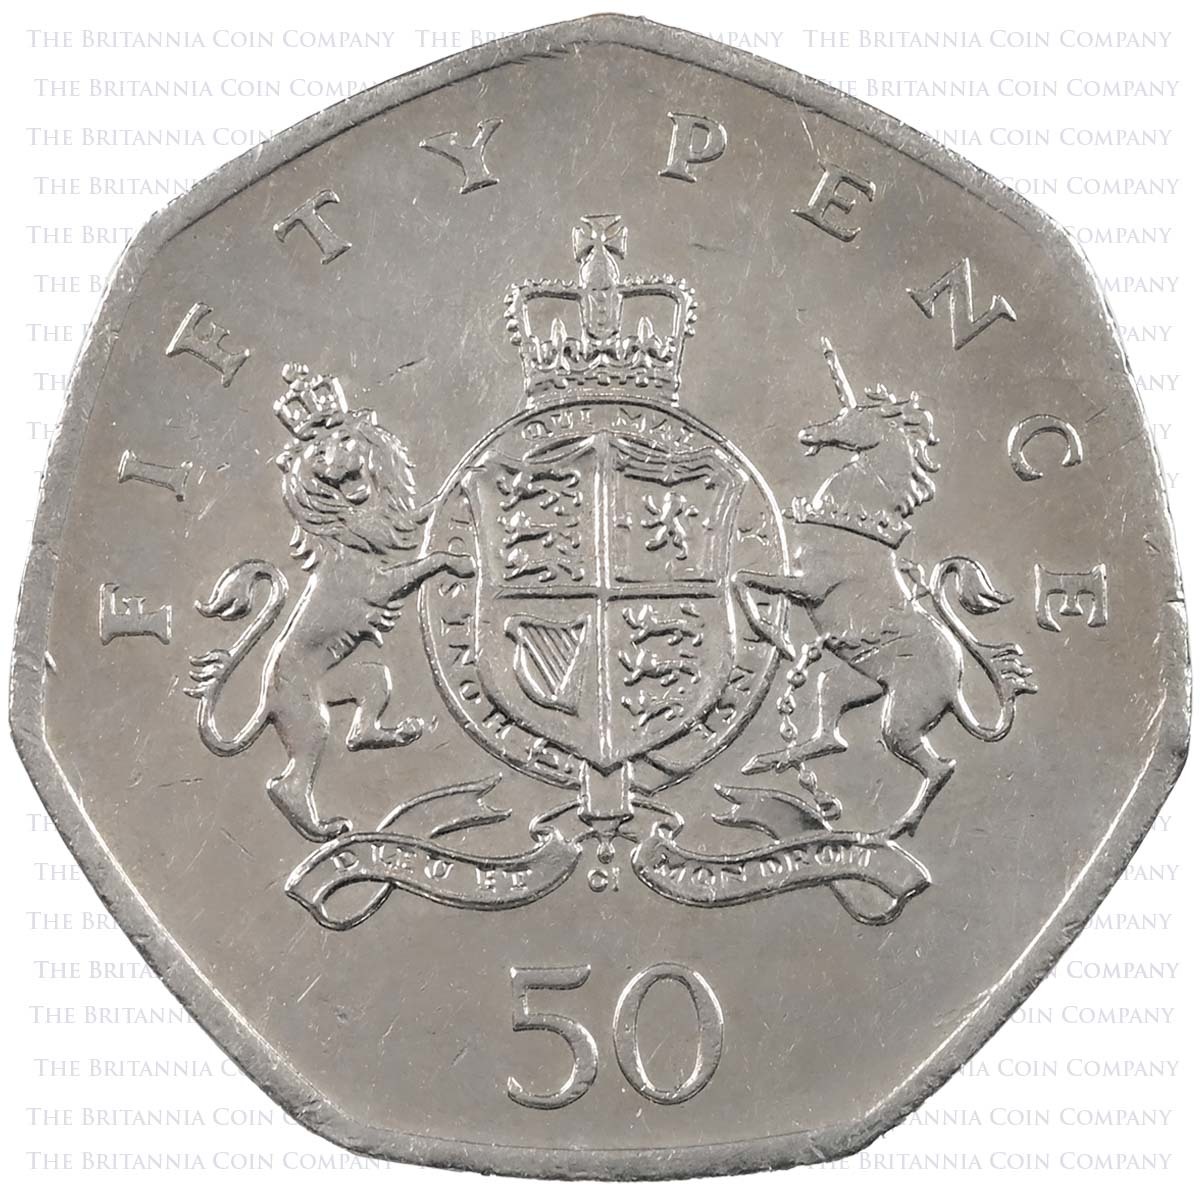 2013 Christopher Ironside Royal Arms Circulated Fifty Pence Coin Reverse